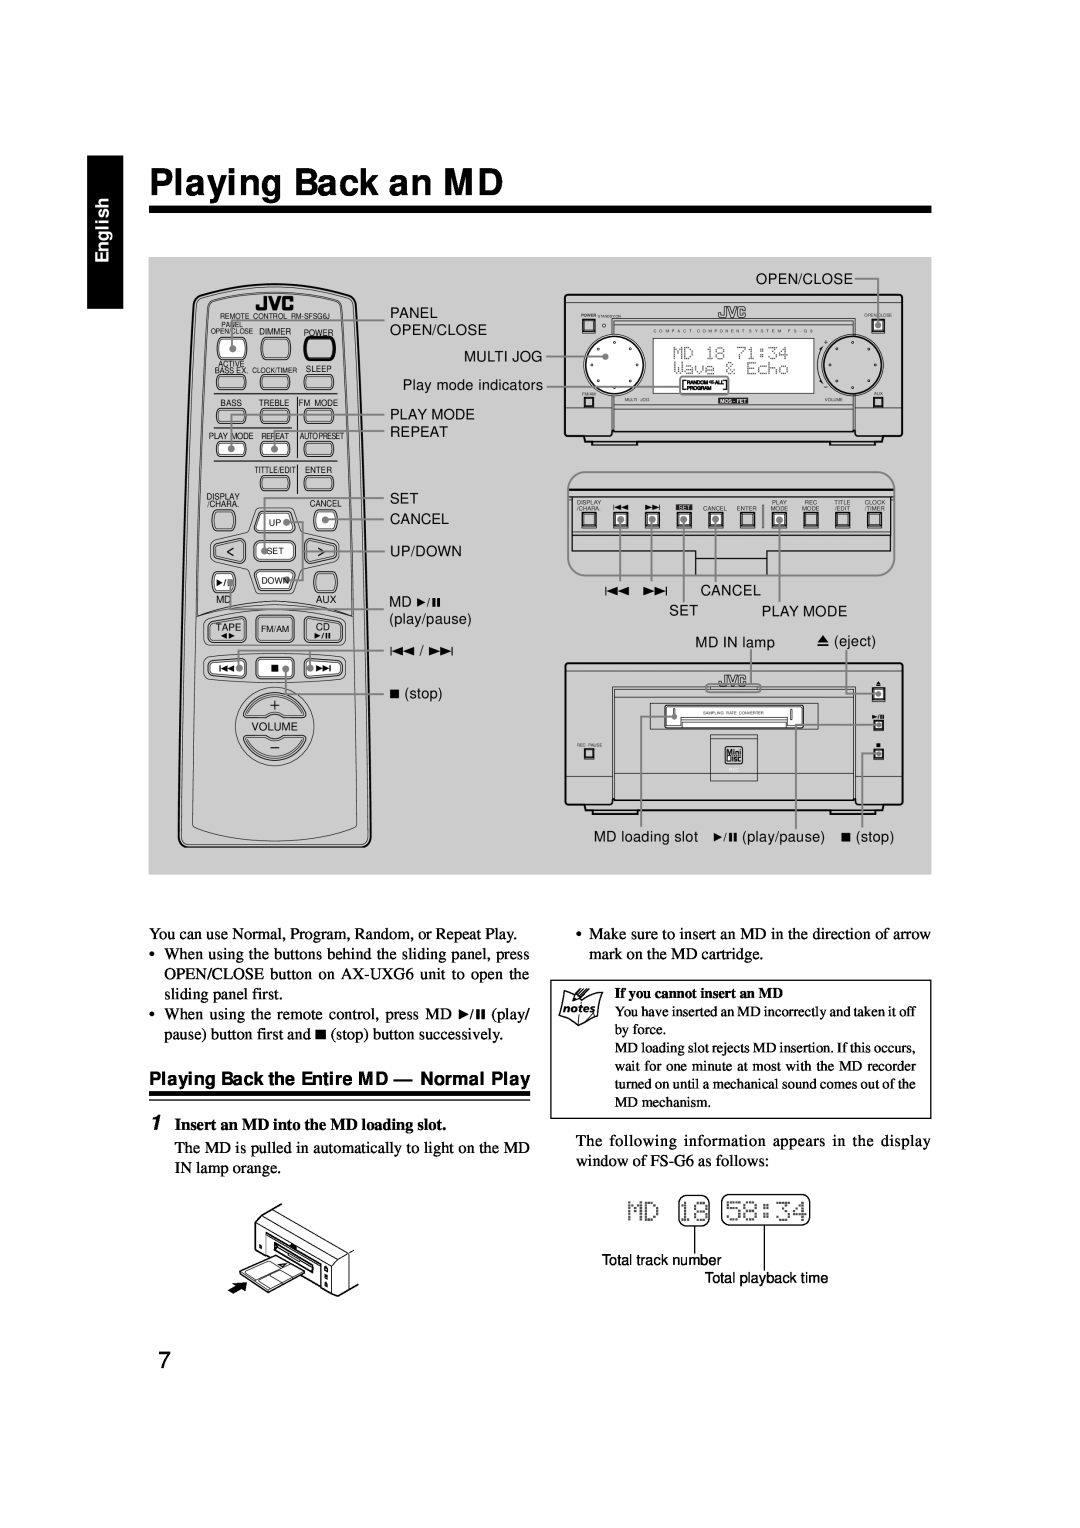 JVC LVT0378-001A, 0200JTMMDWJSCEN manual Playing Back an MD, Playing Back the Entire MD - Normal Play, English 